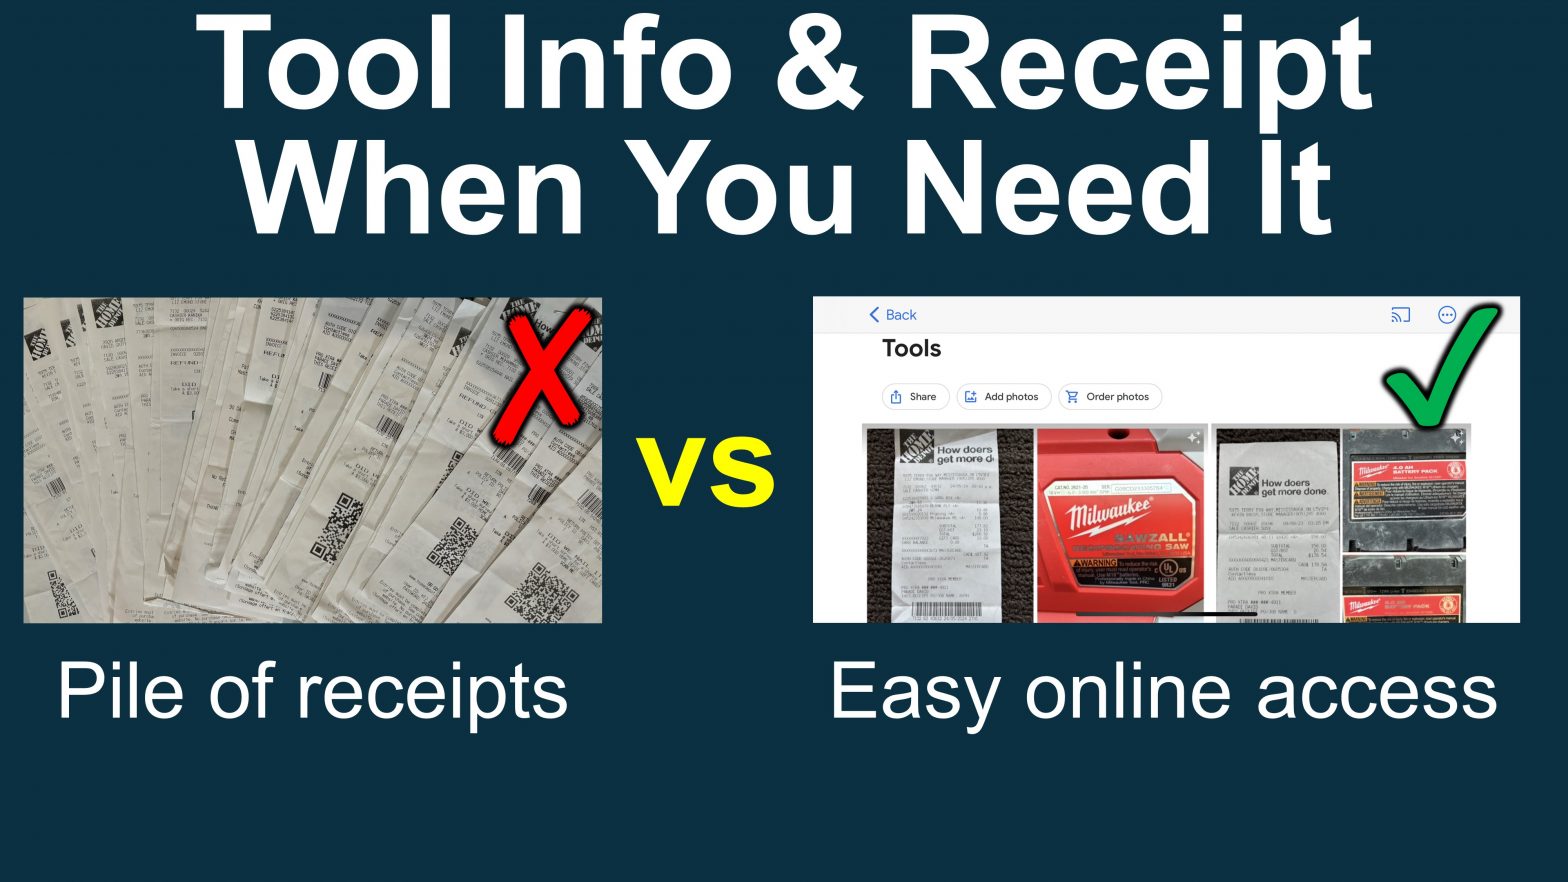 Easily Access Tool Serial # and Receipt For Warranty & Insurance